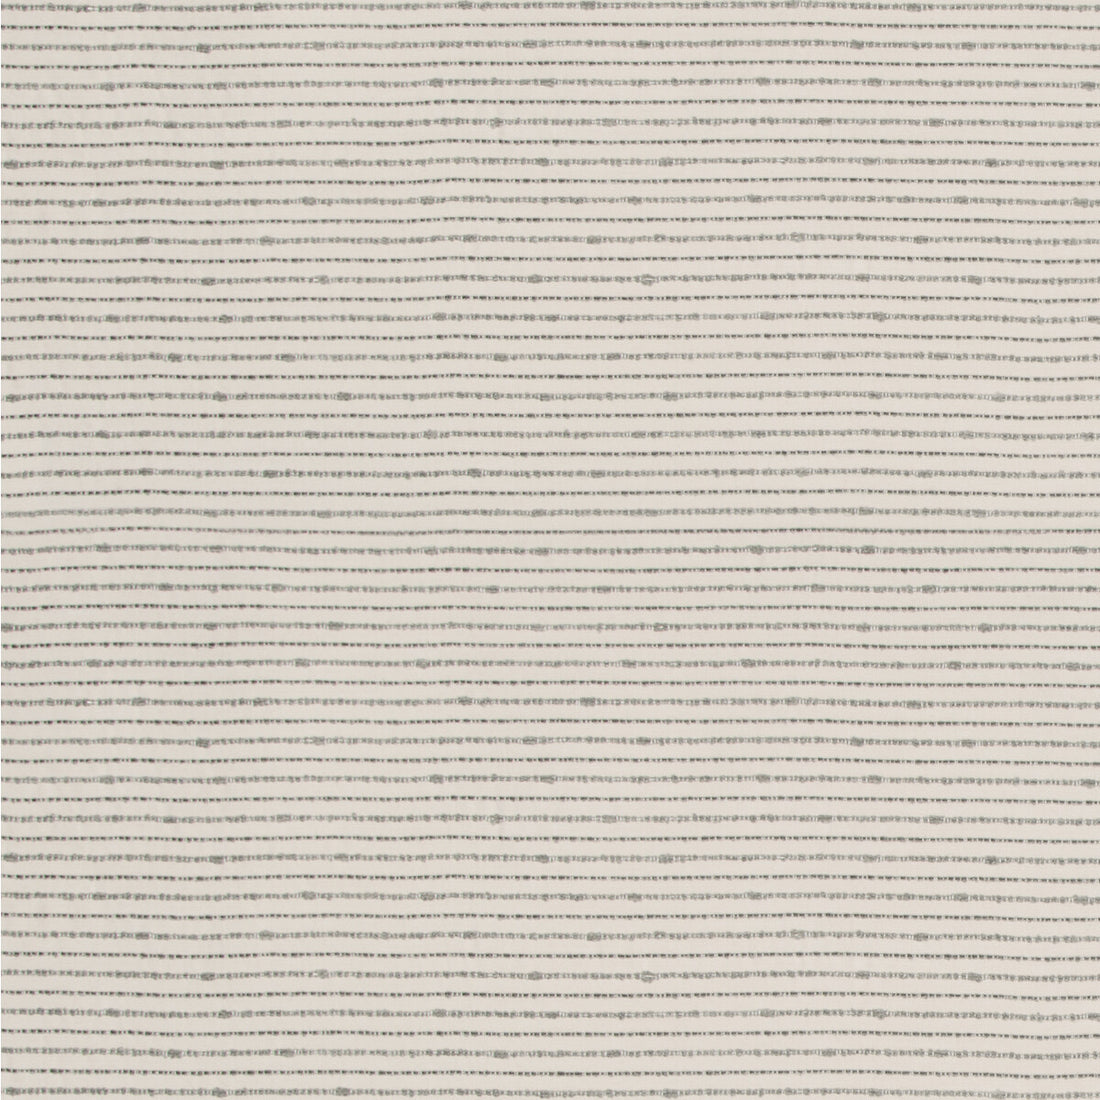 Seeth fabric in smoke color - pattern GWF-3736.111.0 - by Lee Jofa Modern in the Kw Terra Firma II Indoor Outdoor collection